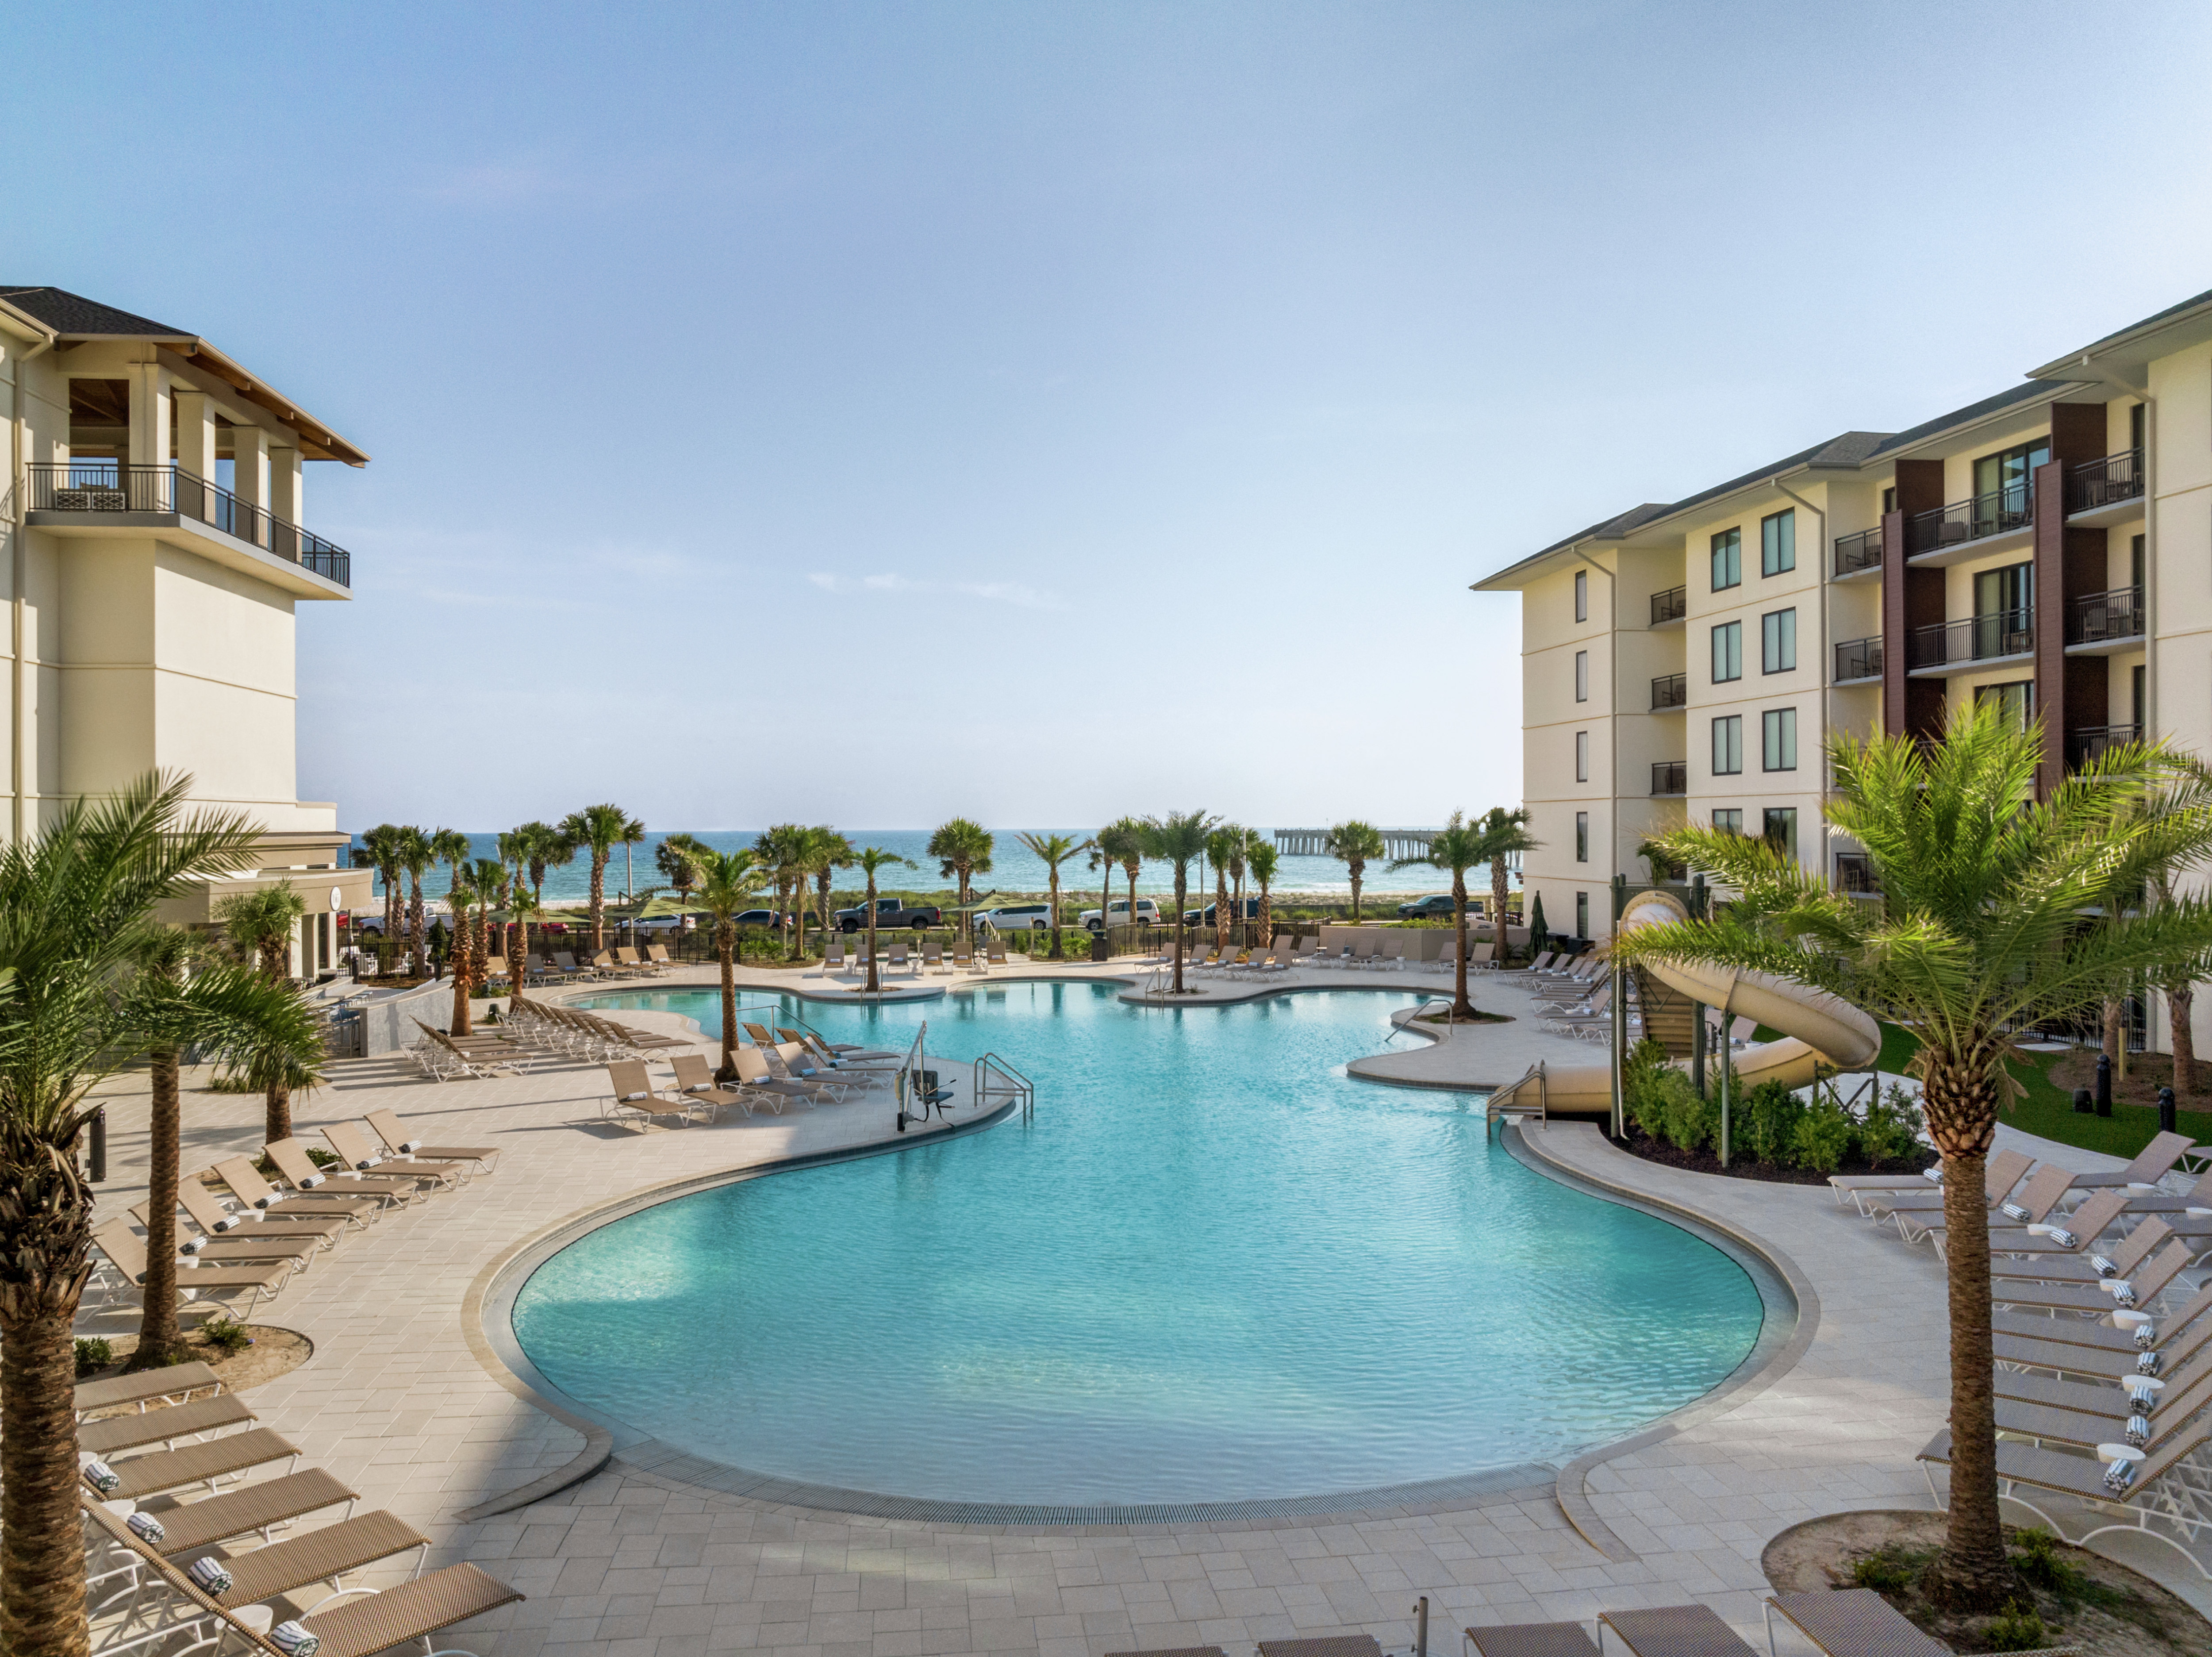 Beautiful resort pool deck with ample lounge seating, waterslide, lush palm trees and ocean views